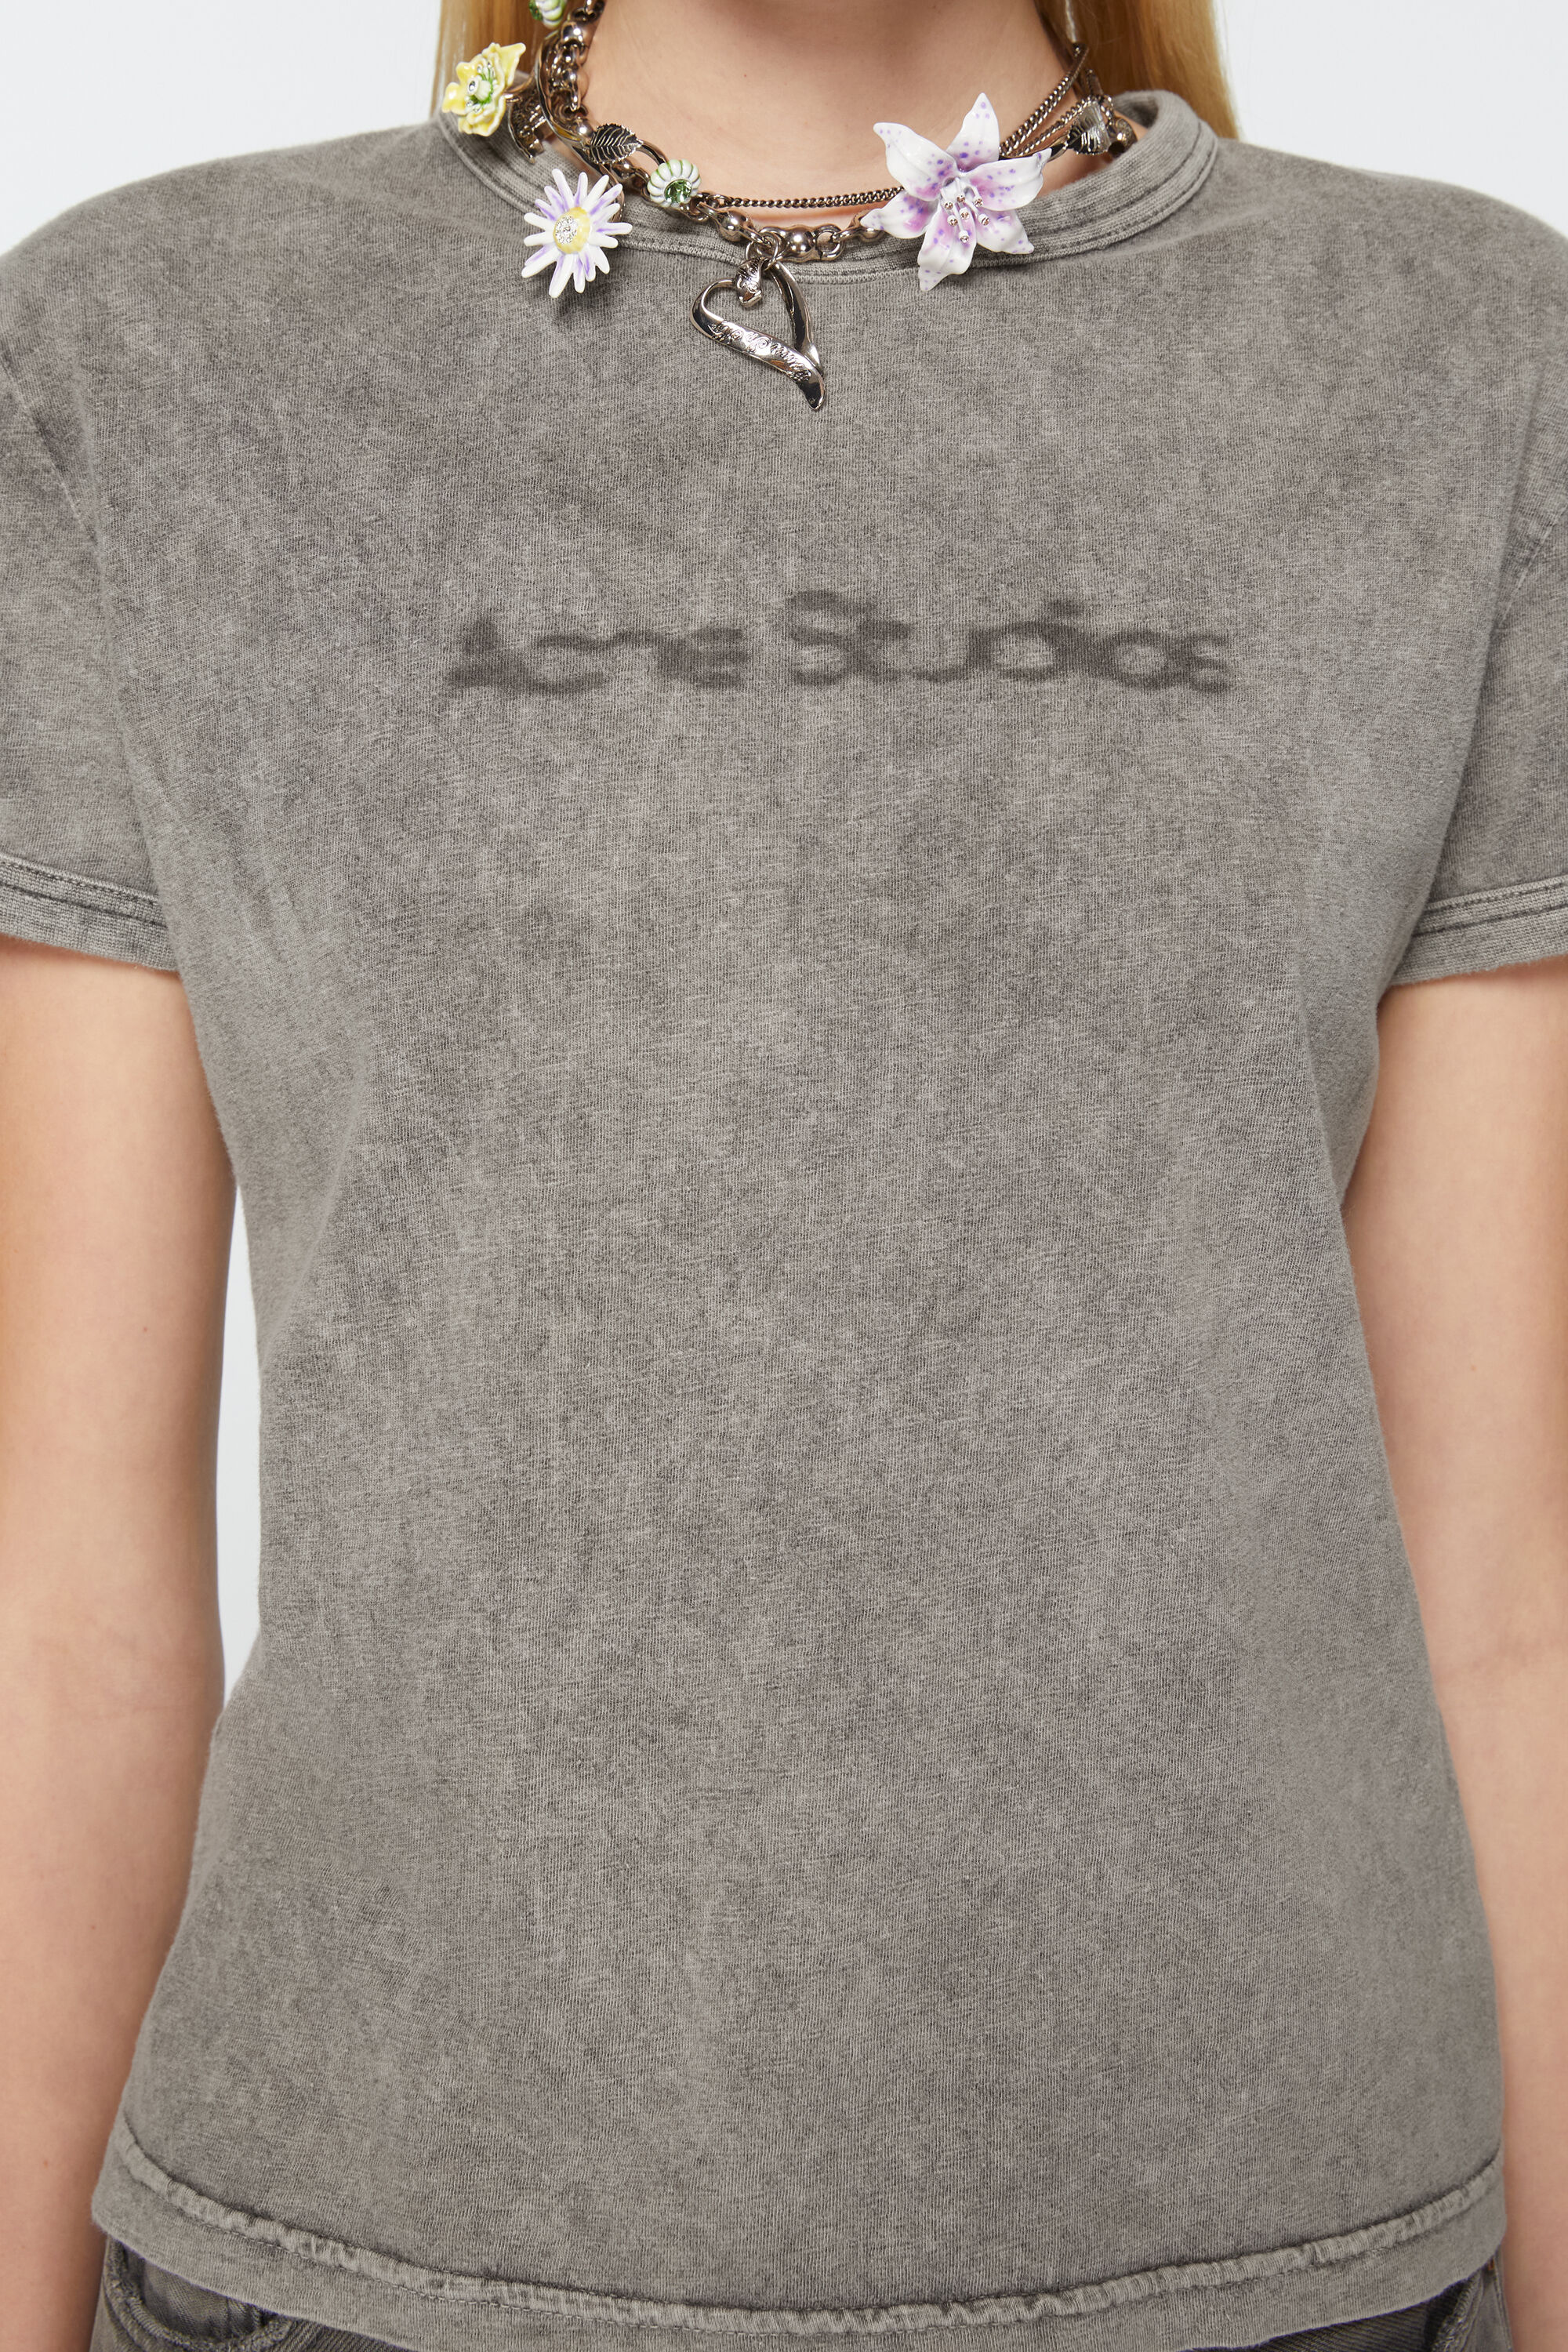 T-shirt blurred logo - Fitted fit